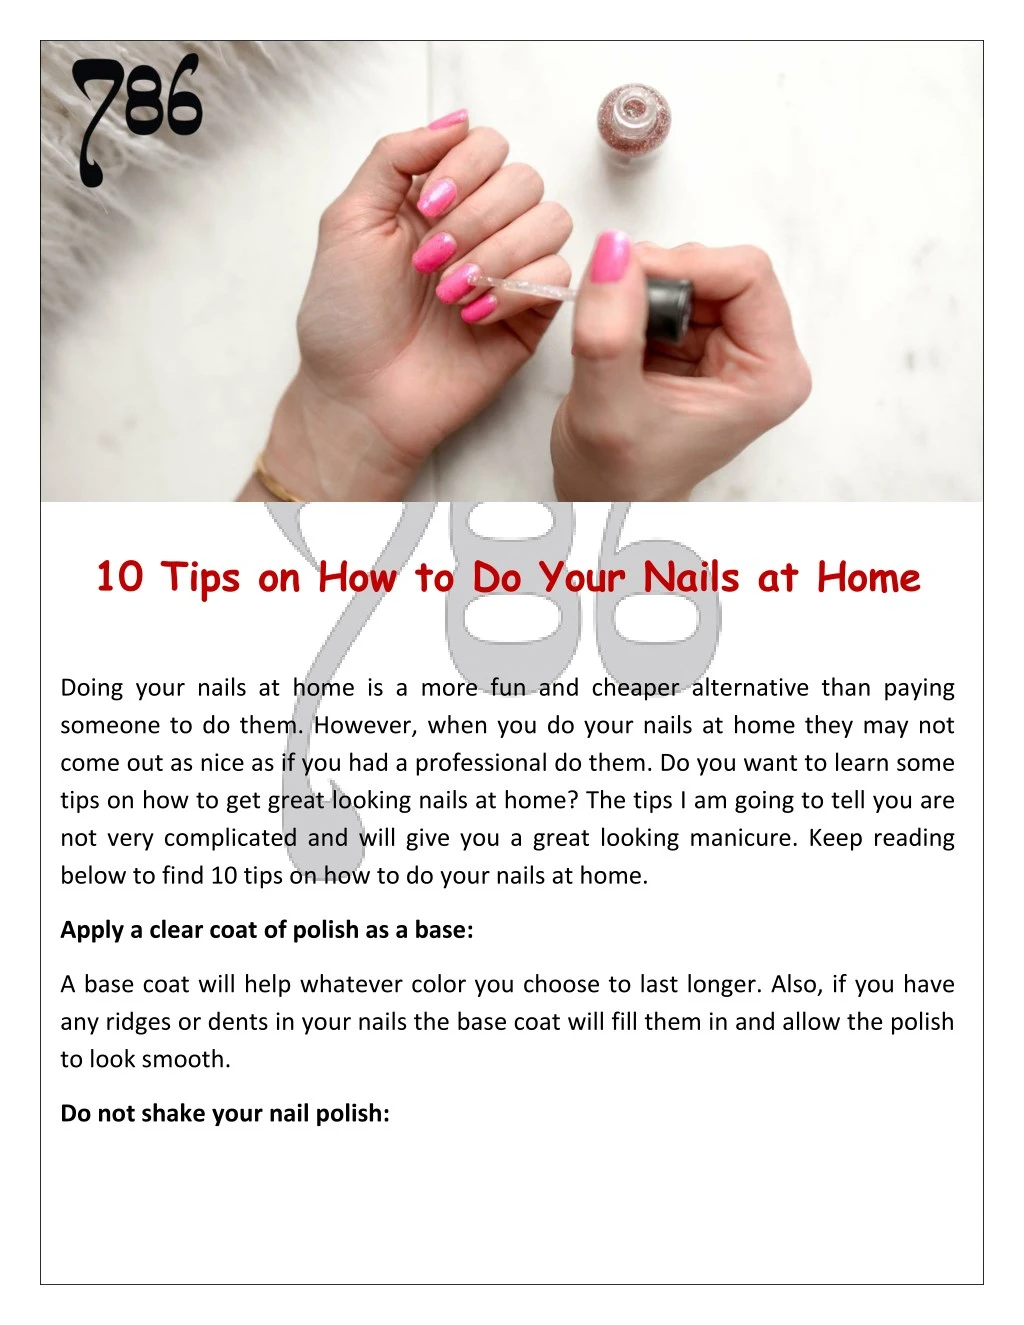 10 tips on how to do your nails at home